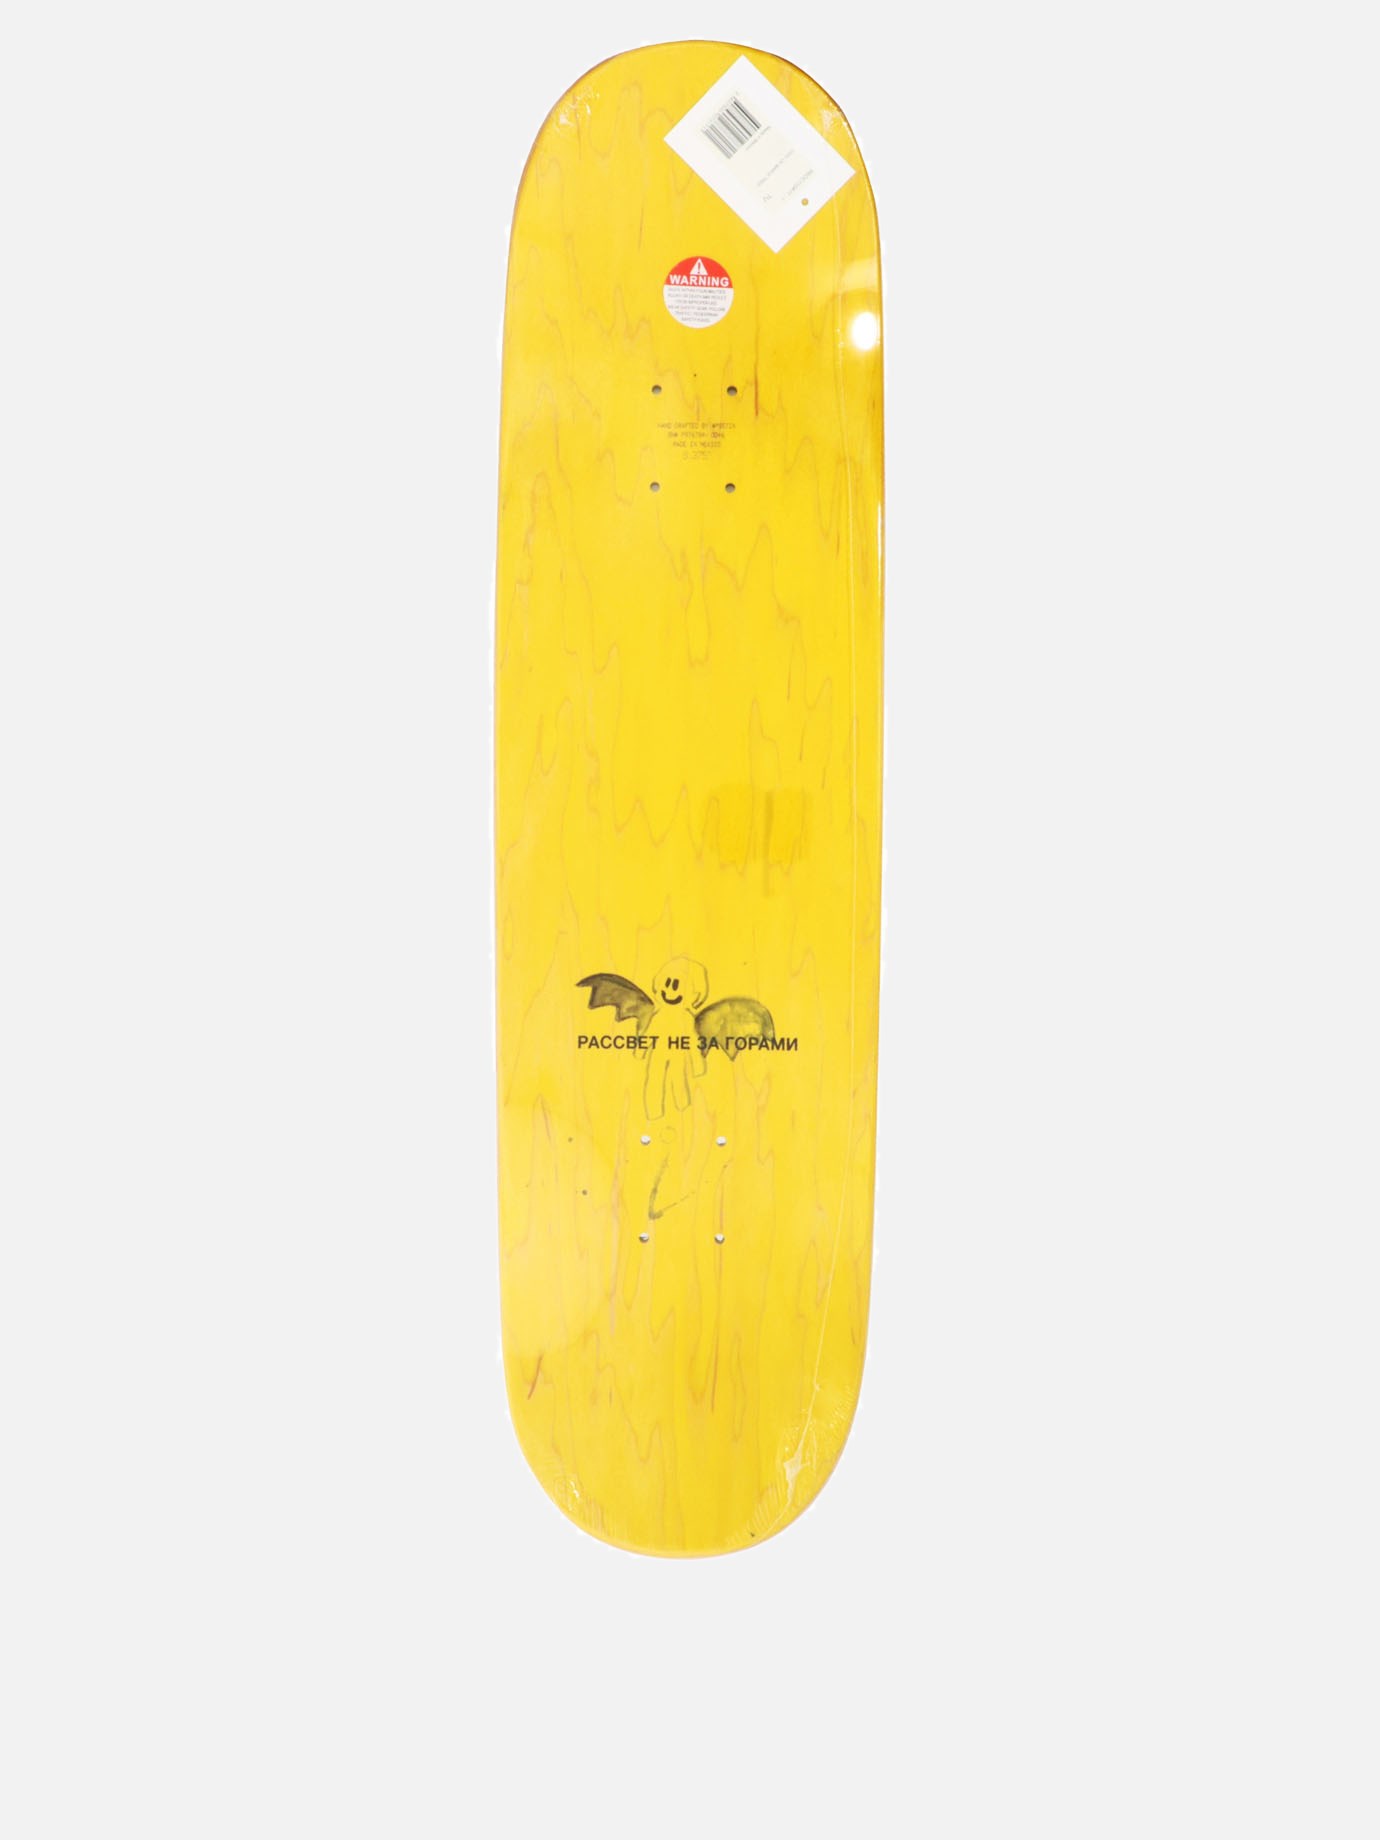 Skateboard  Bauer Pro by Paccbet - 1